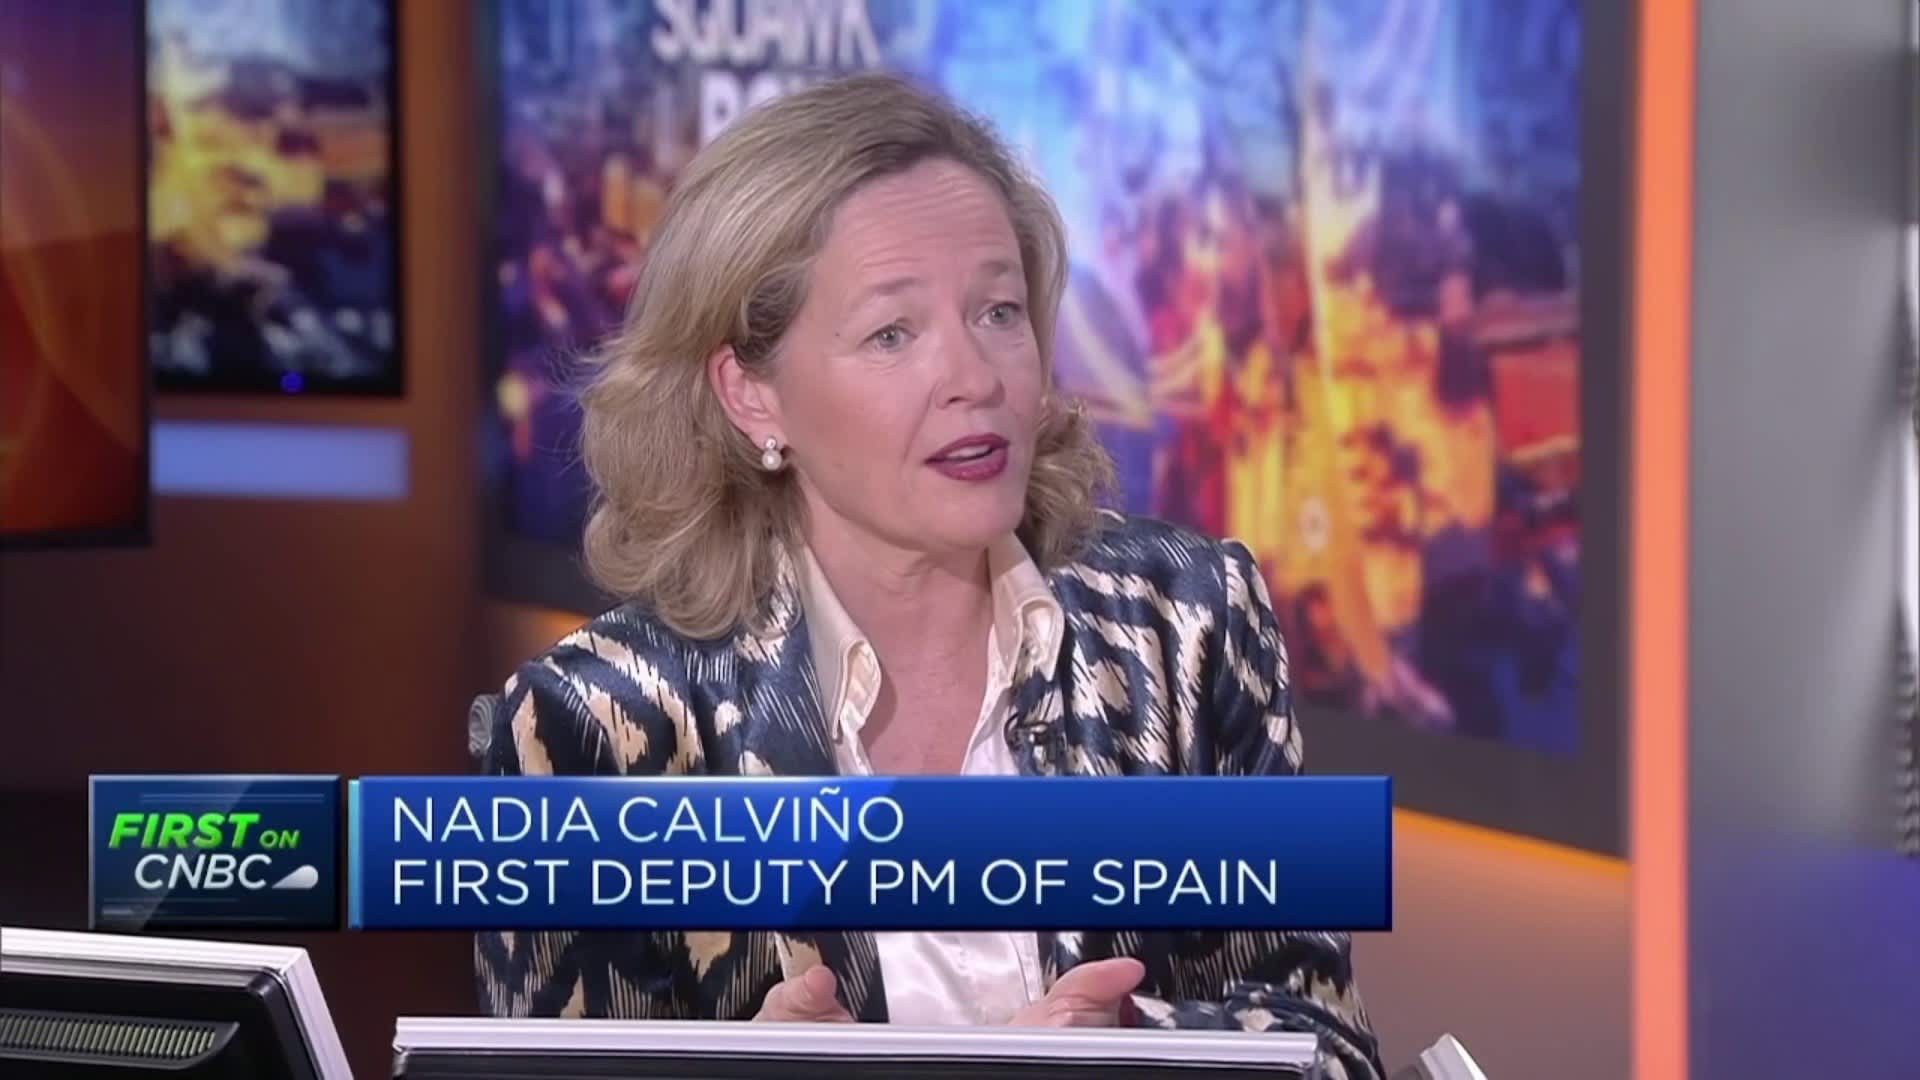 New EIB chief Nadia Calviño says a priority is 'to speed up procedures'